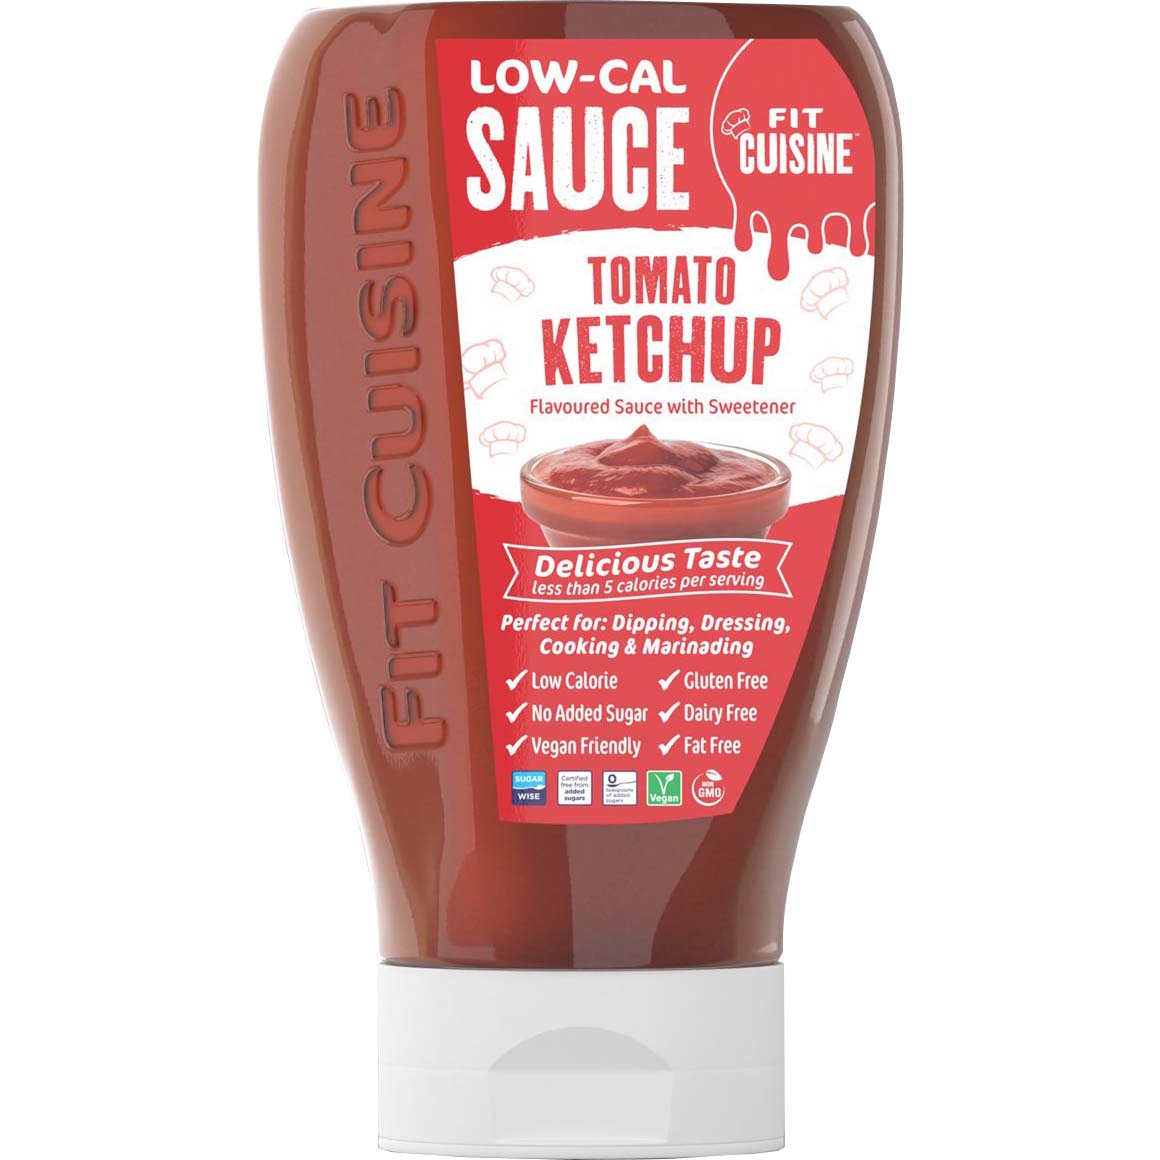 Applied Nutrition Low Cal Sauce Tomato Ketchup